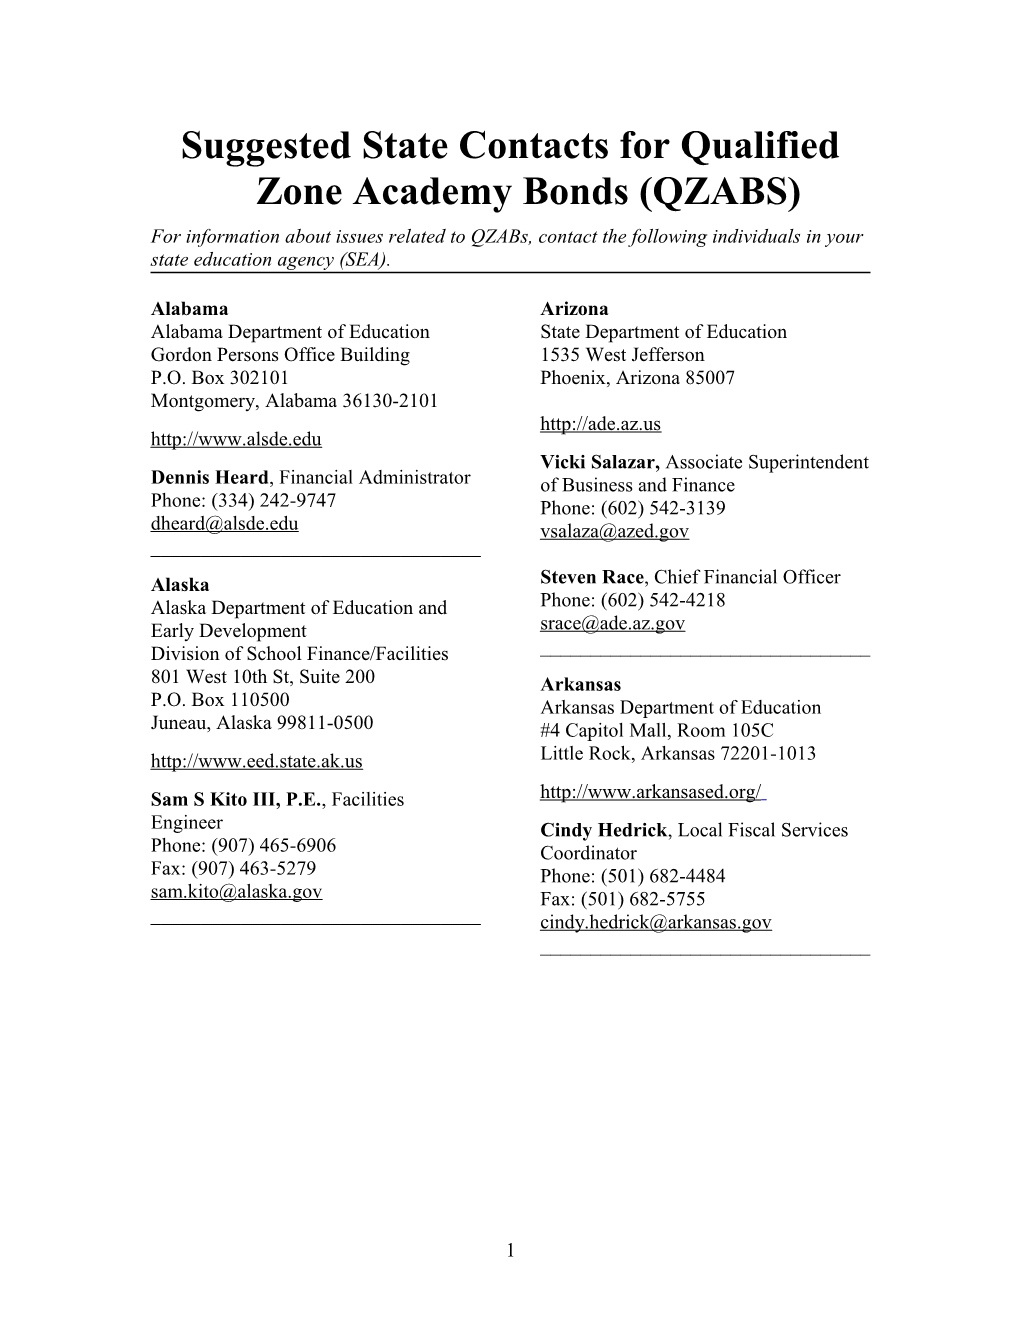 State Contacts for Qualified Zone Academy Bonds (MS Word)